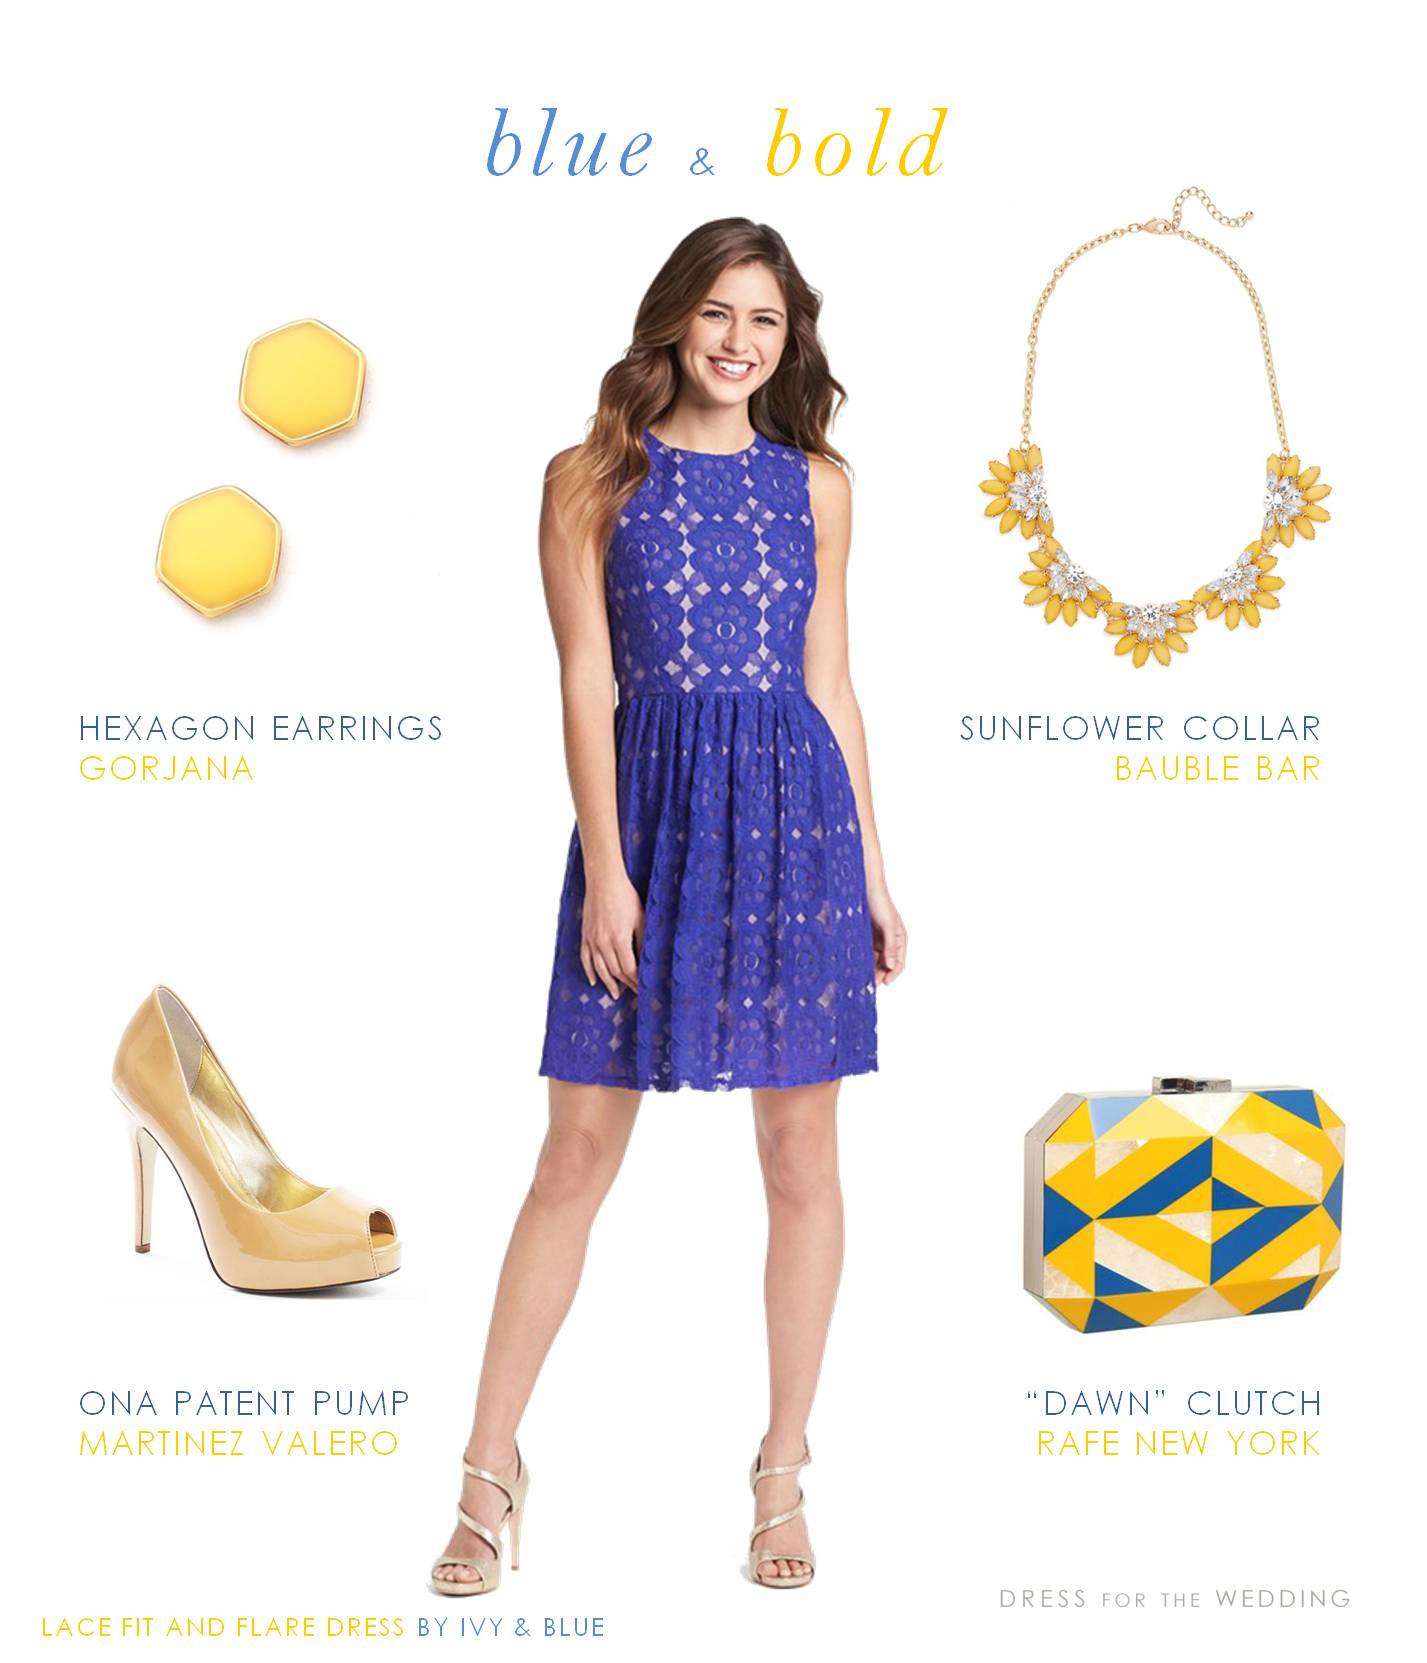 Cobalt Blue Dress with Yellow Accessories | Fall Fashion Ideas